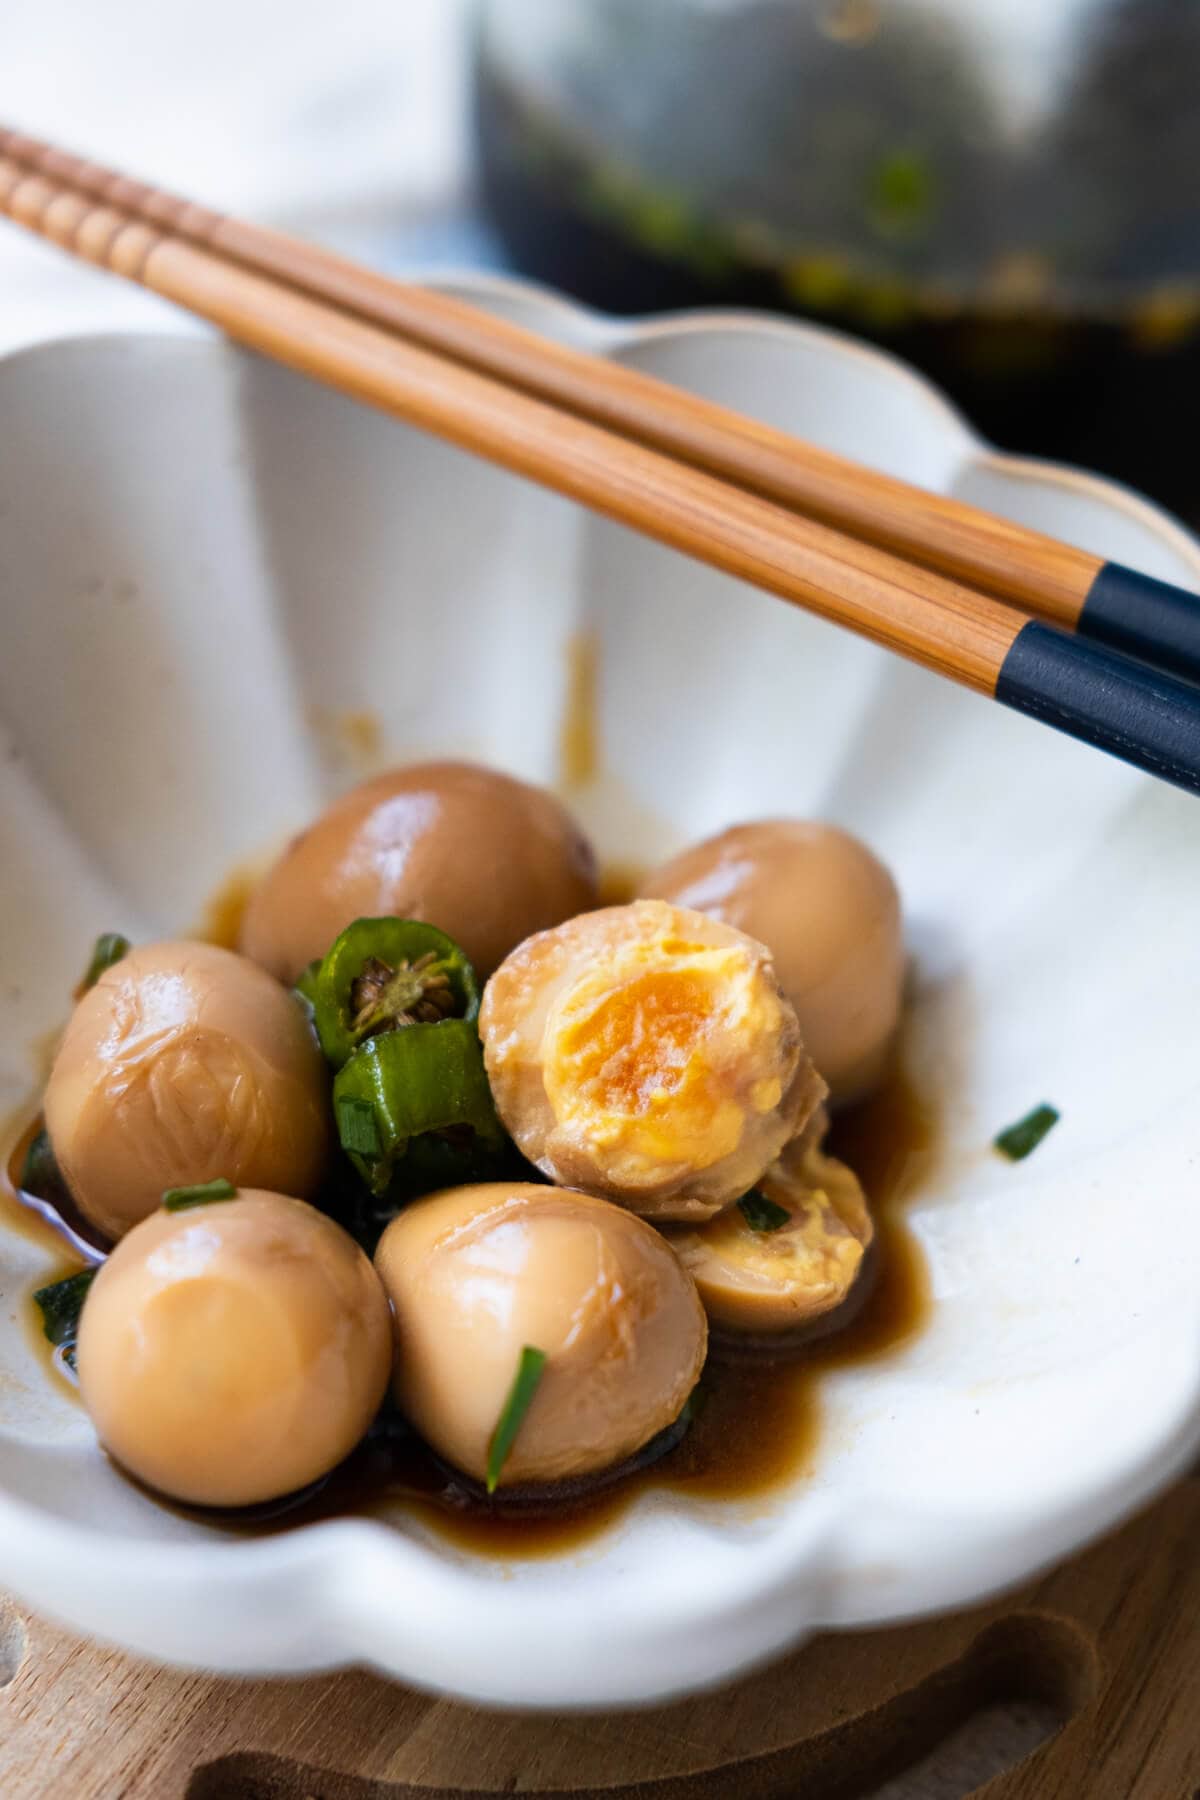 Soy sauce soaked brown quail eggs  with creamy egg yolk and chili pepper served in a bowl with chopsticks. 